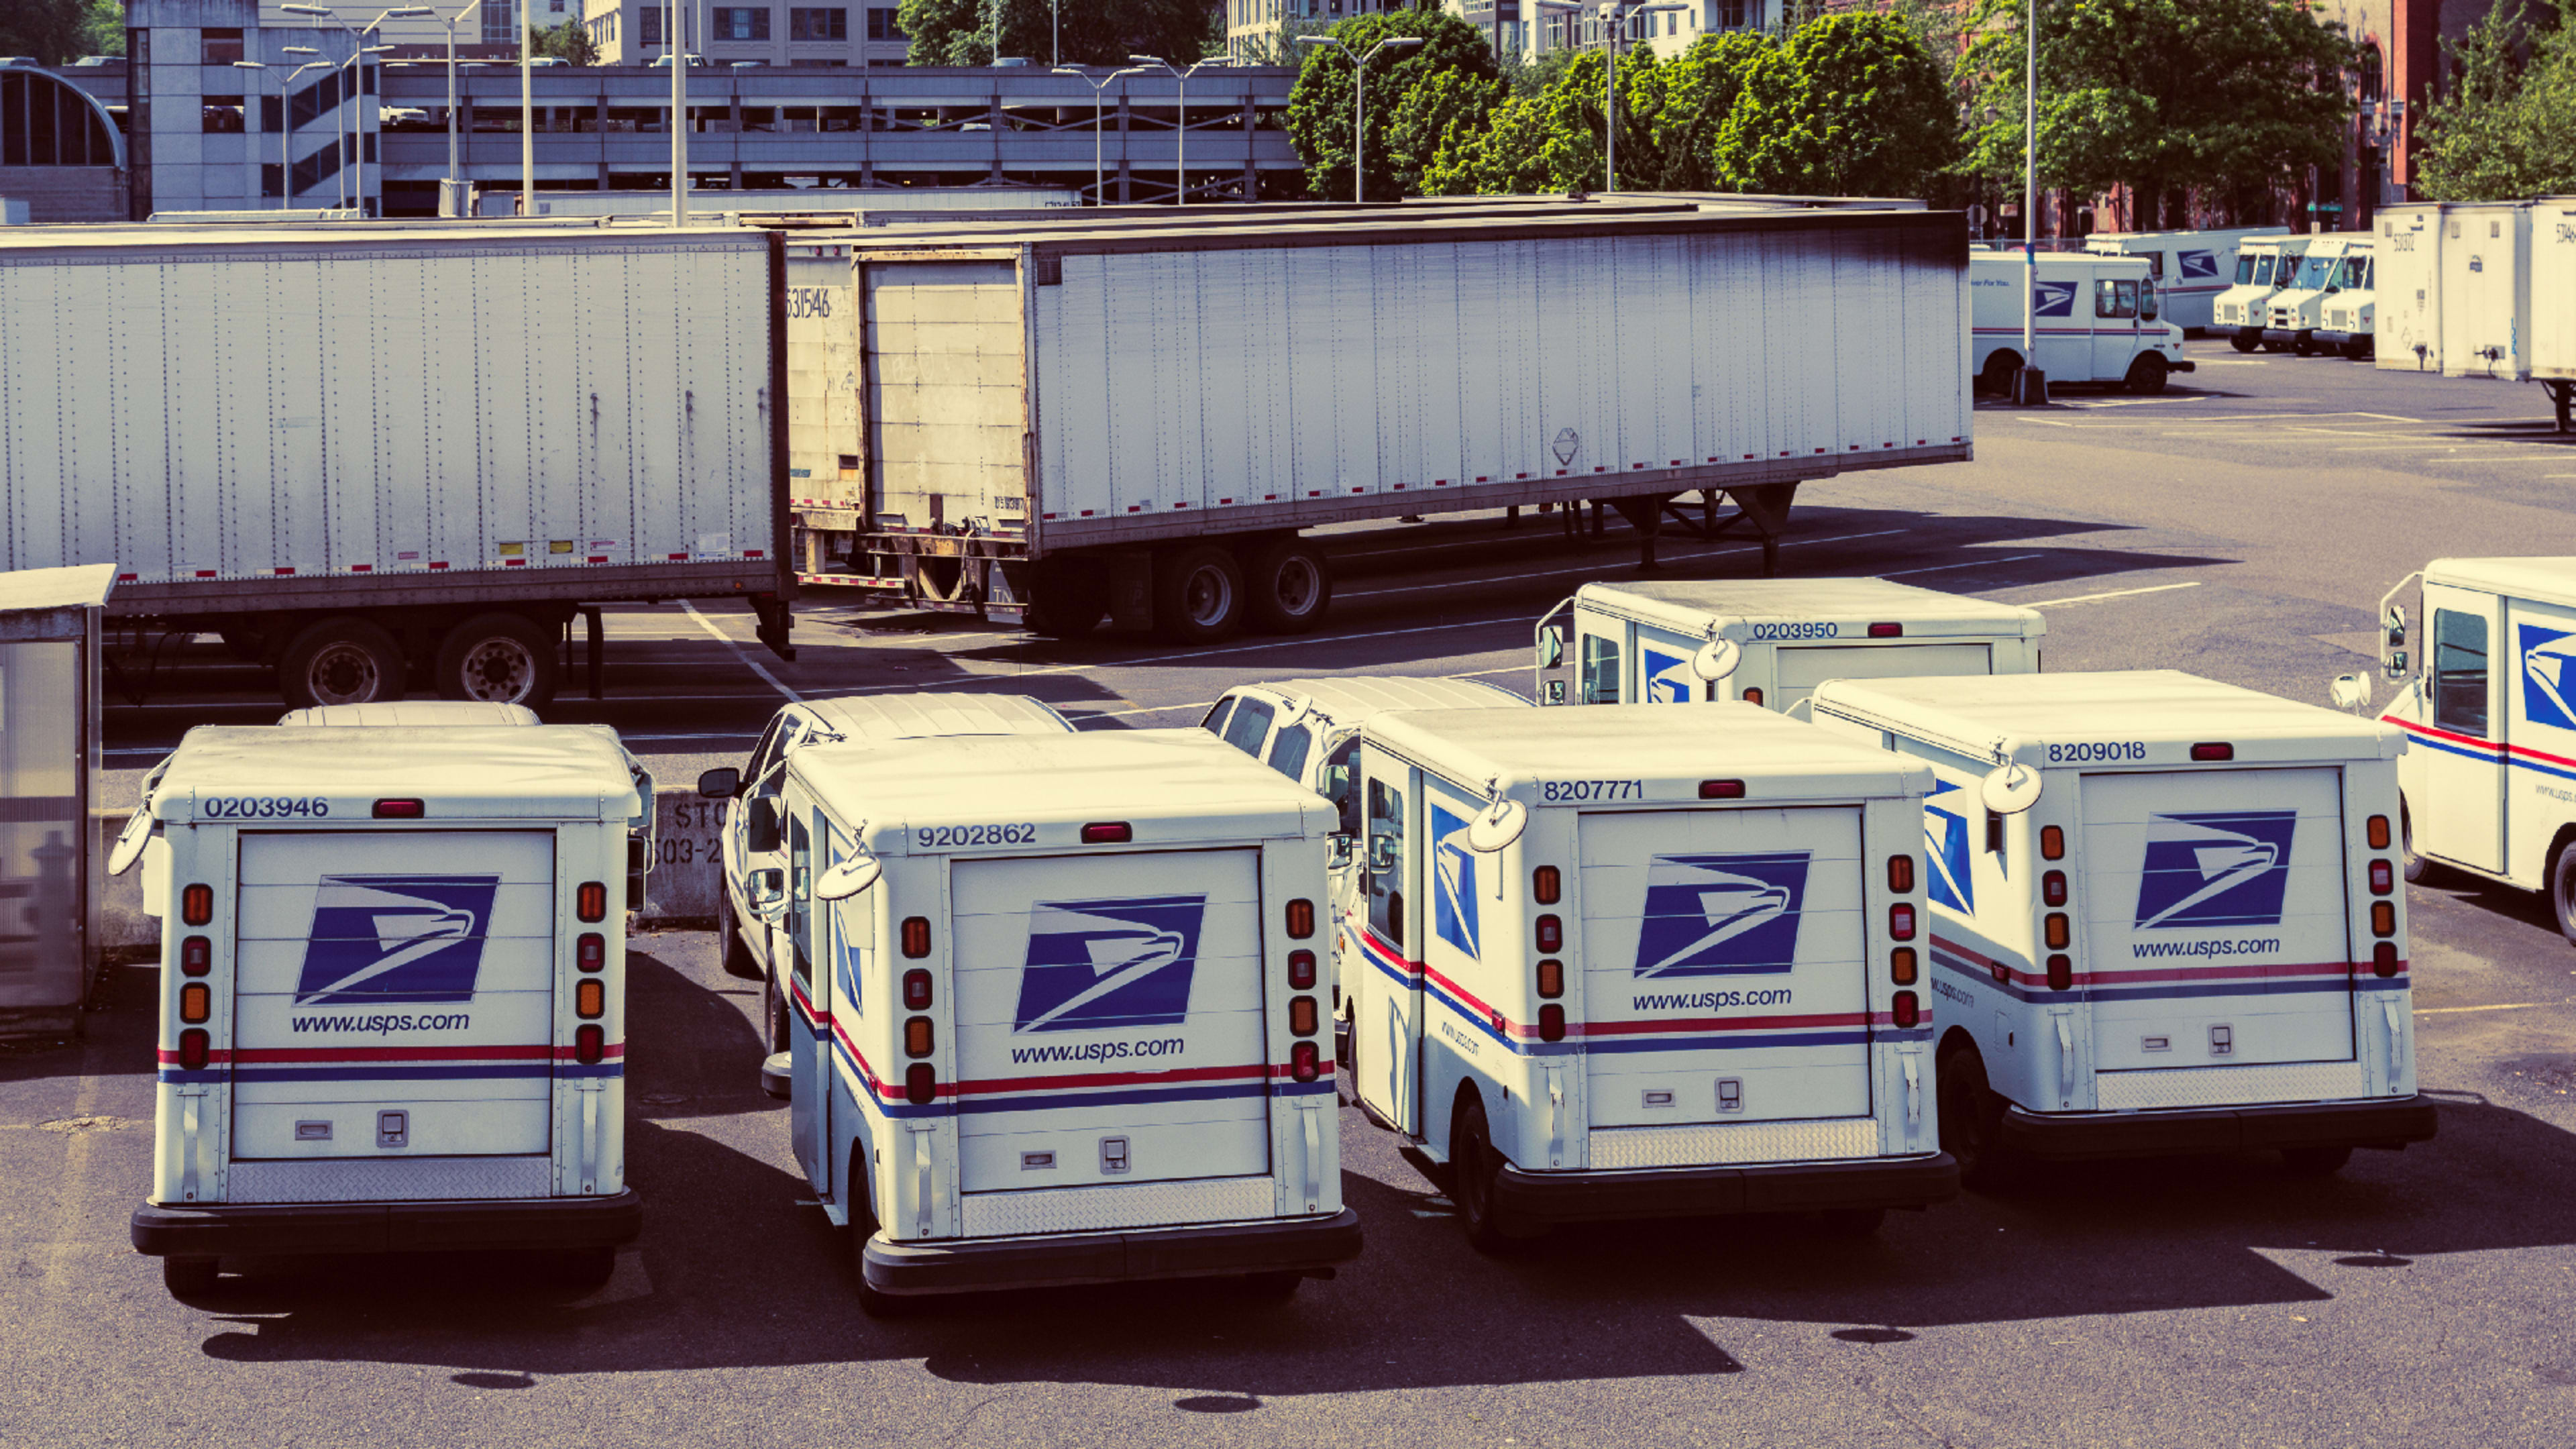 Report: ID thieves are exploiting USPS mail-scanning service, Secret Service warns